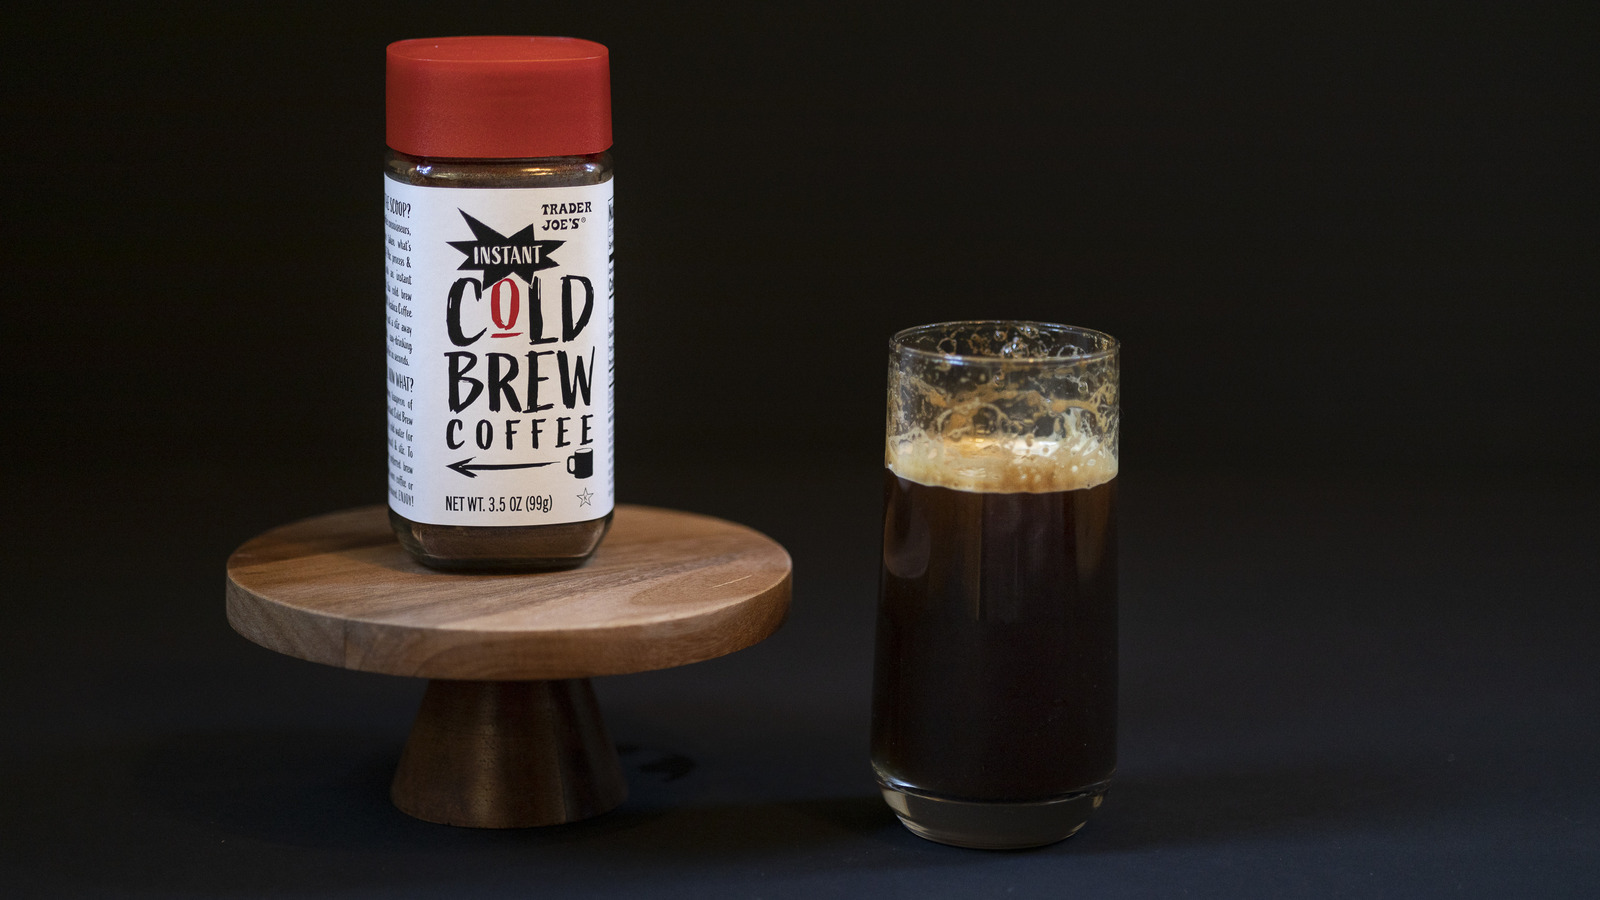 https://www.tastingtable.com/img/gallery/how-trader-joes-instant-cold-brew-works/l-intro-1668201222.jpg